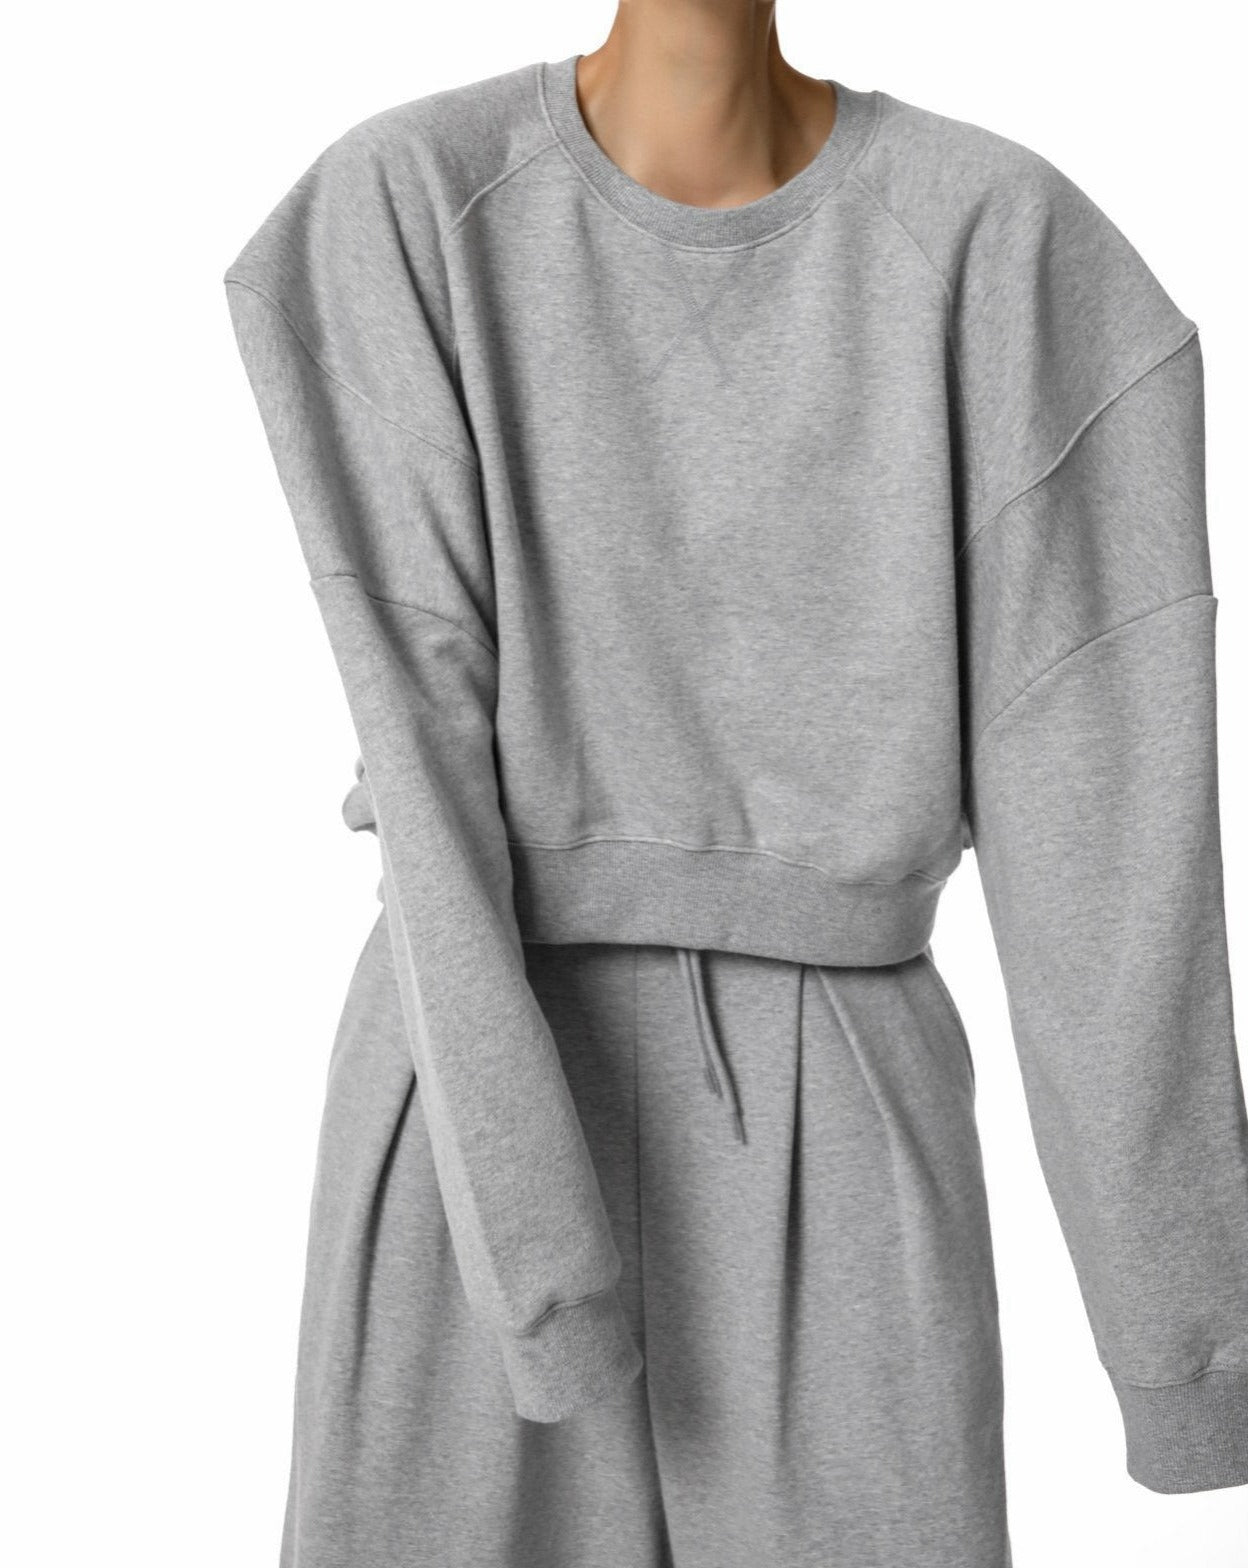 【PAPERMOON 페이퍼 문】SS / Squared Dropped Shoulder Detail Draping Pattern Sweatshirt